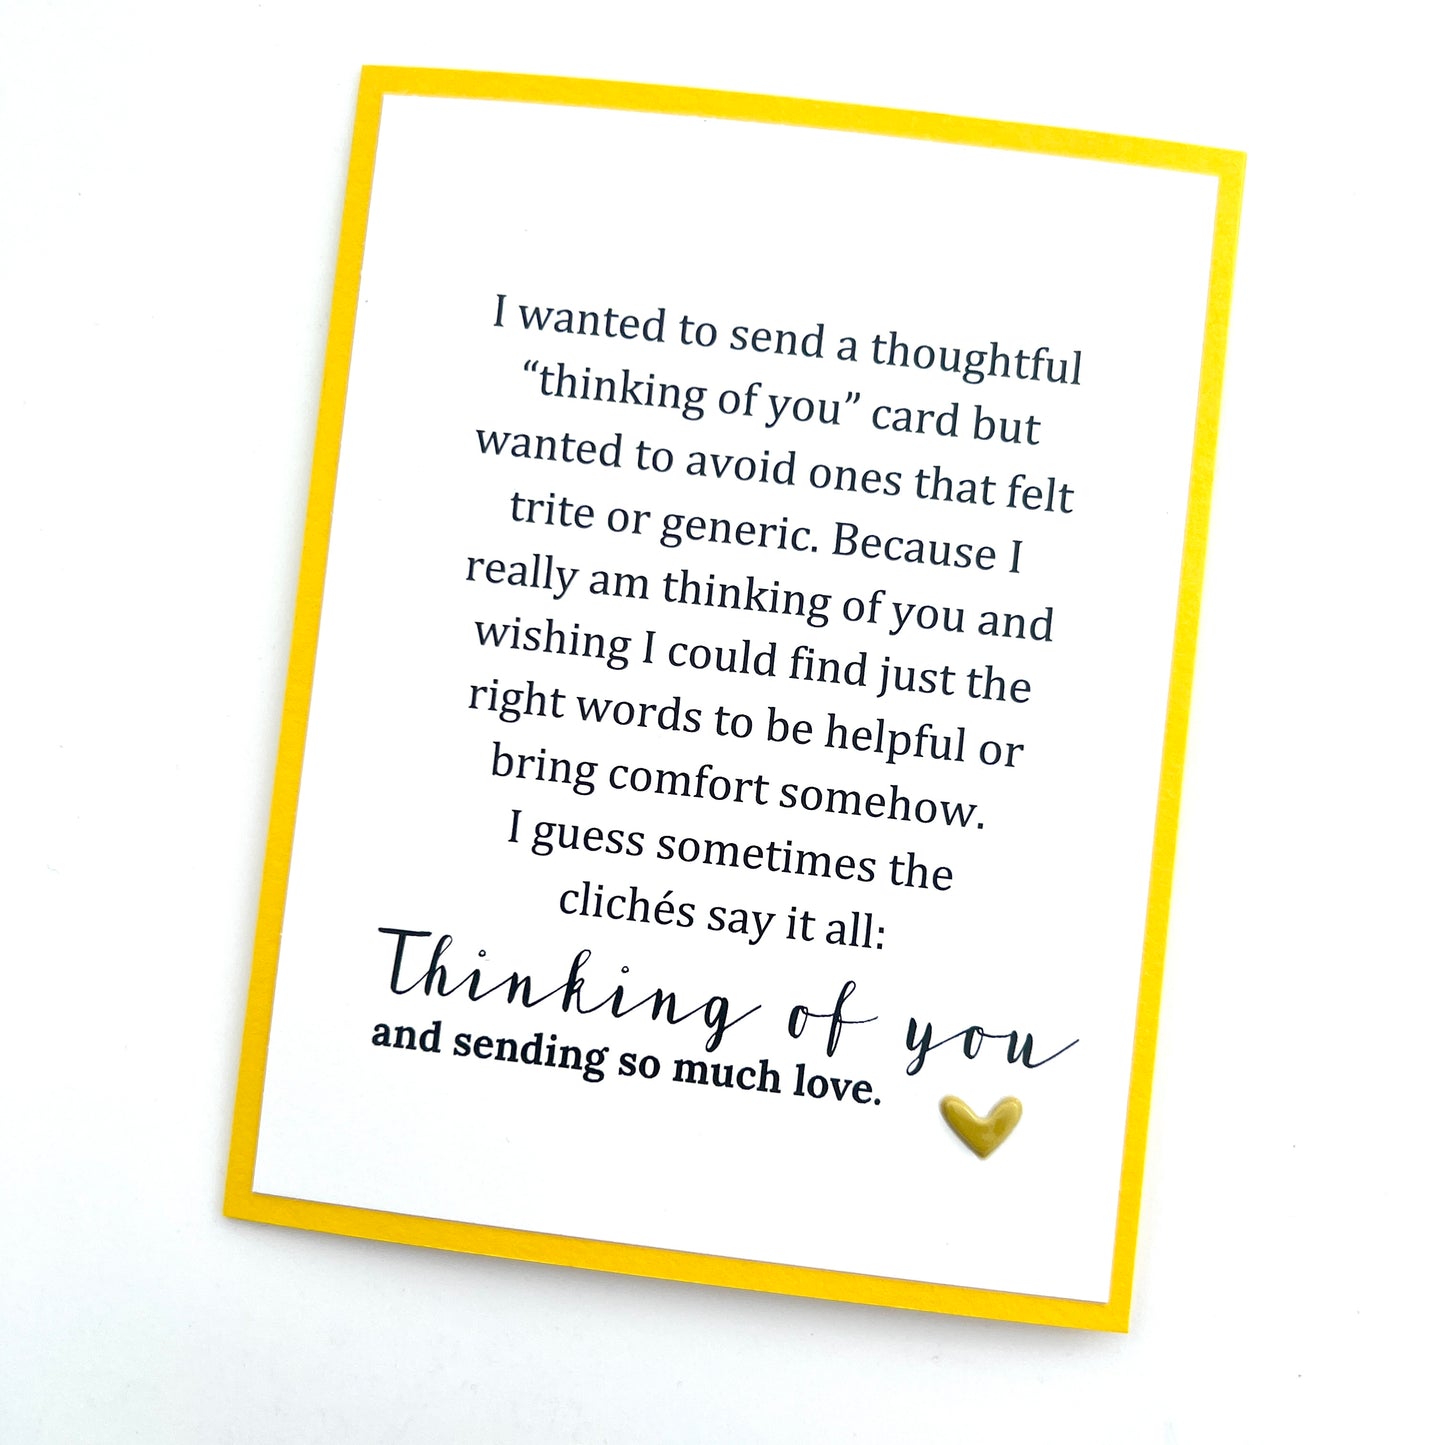 Cliche Thinking of You card